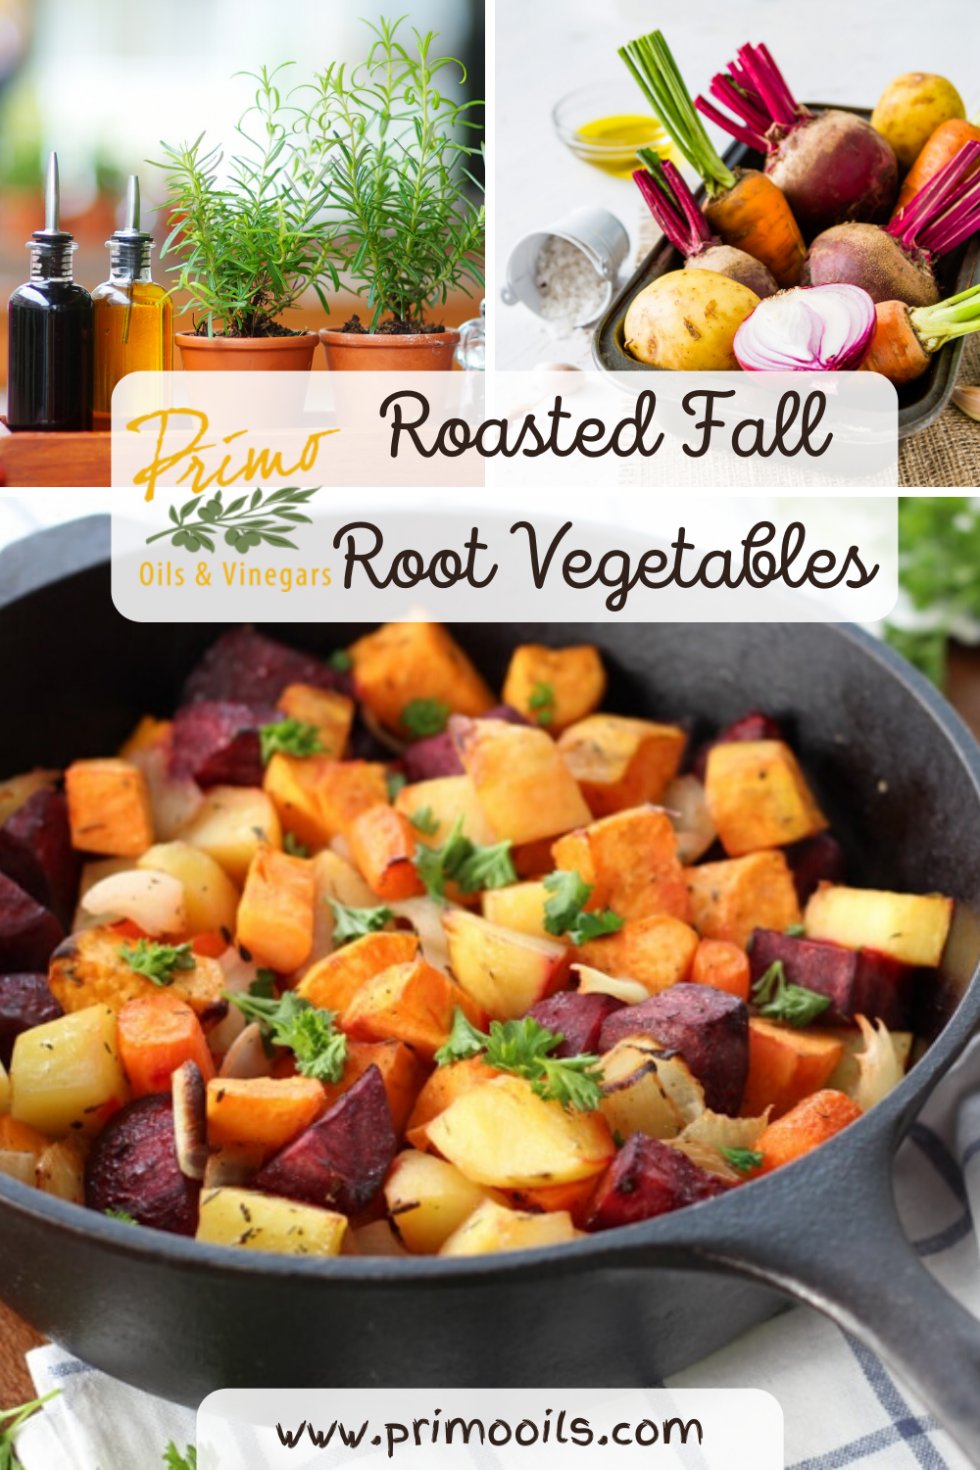 Roasted Fall Root Vegetables - Primo Oils and Vinegars